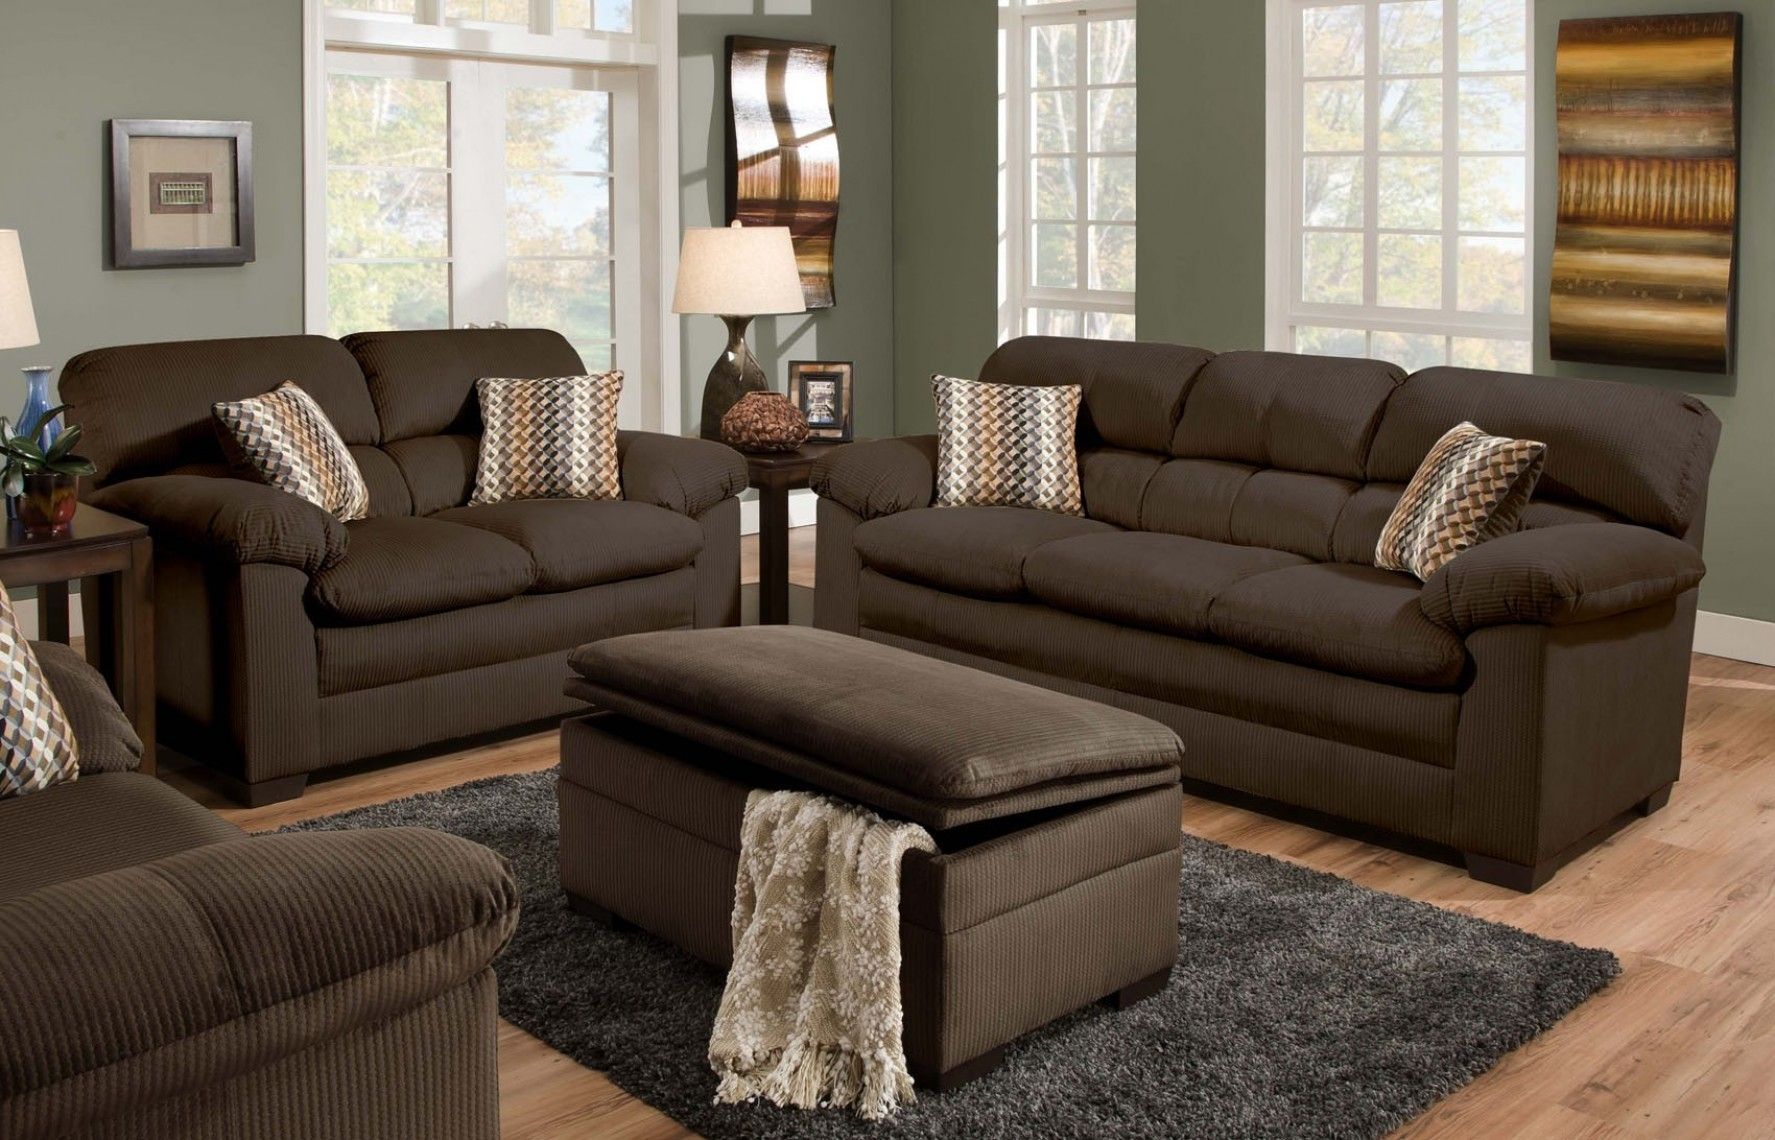 Cappuccino Sectional Sofa Set Having Pillow Arms Details Also Inside Sofas With Ottoman (View 8 of 10)